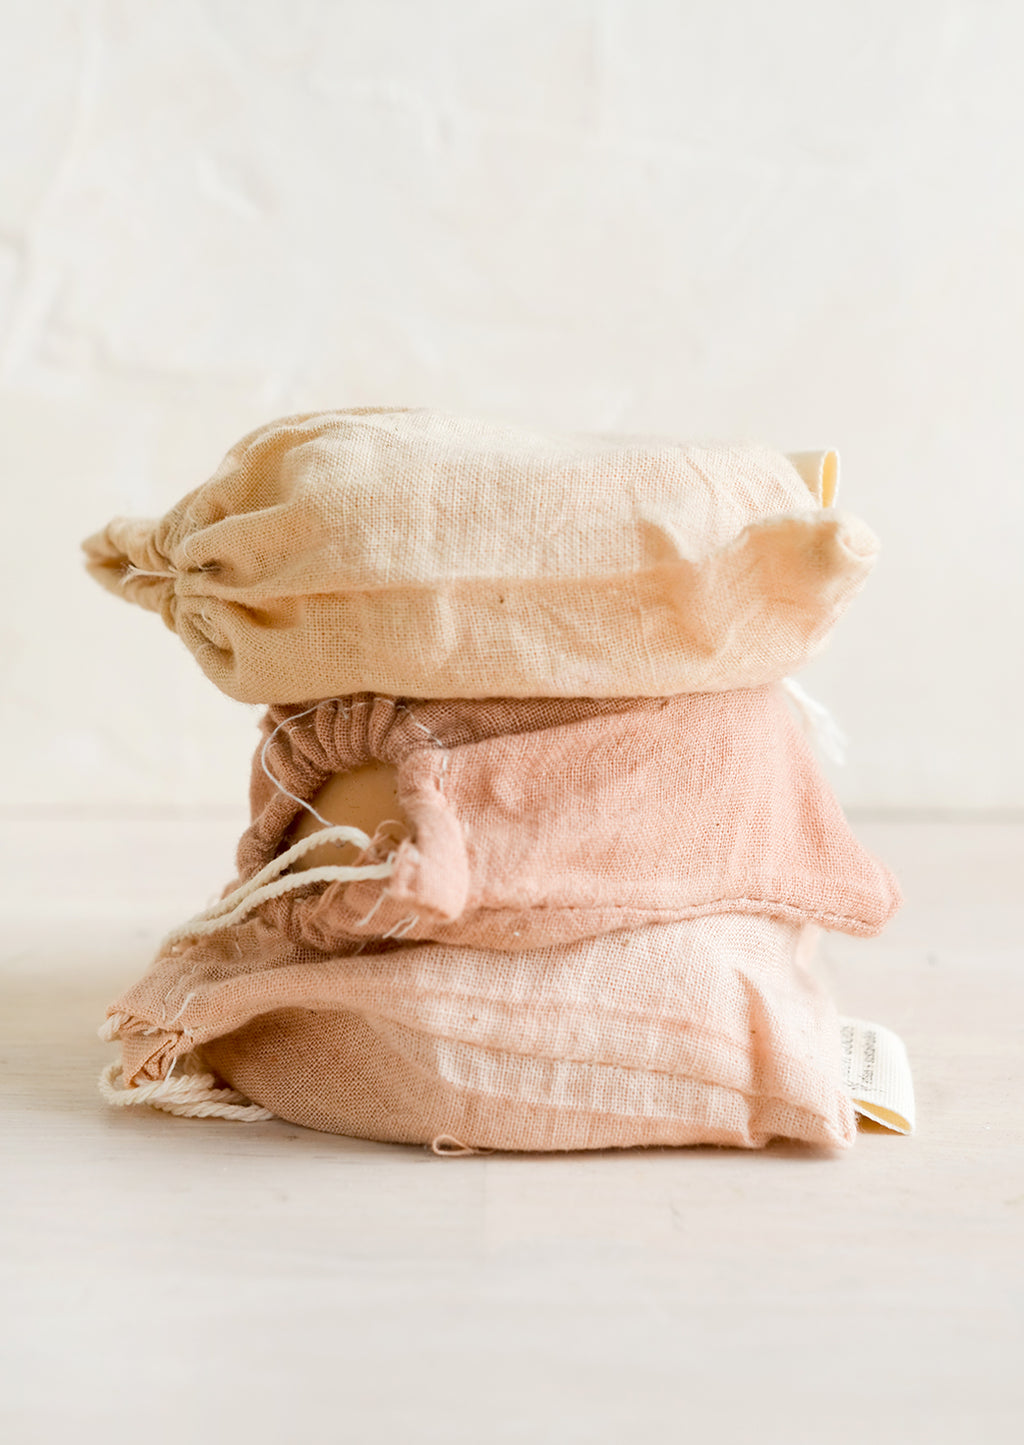 3: A stack of naturally dyed muslin pouches holding soap.